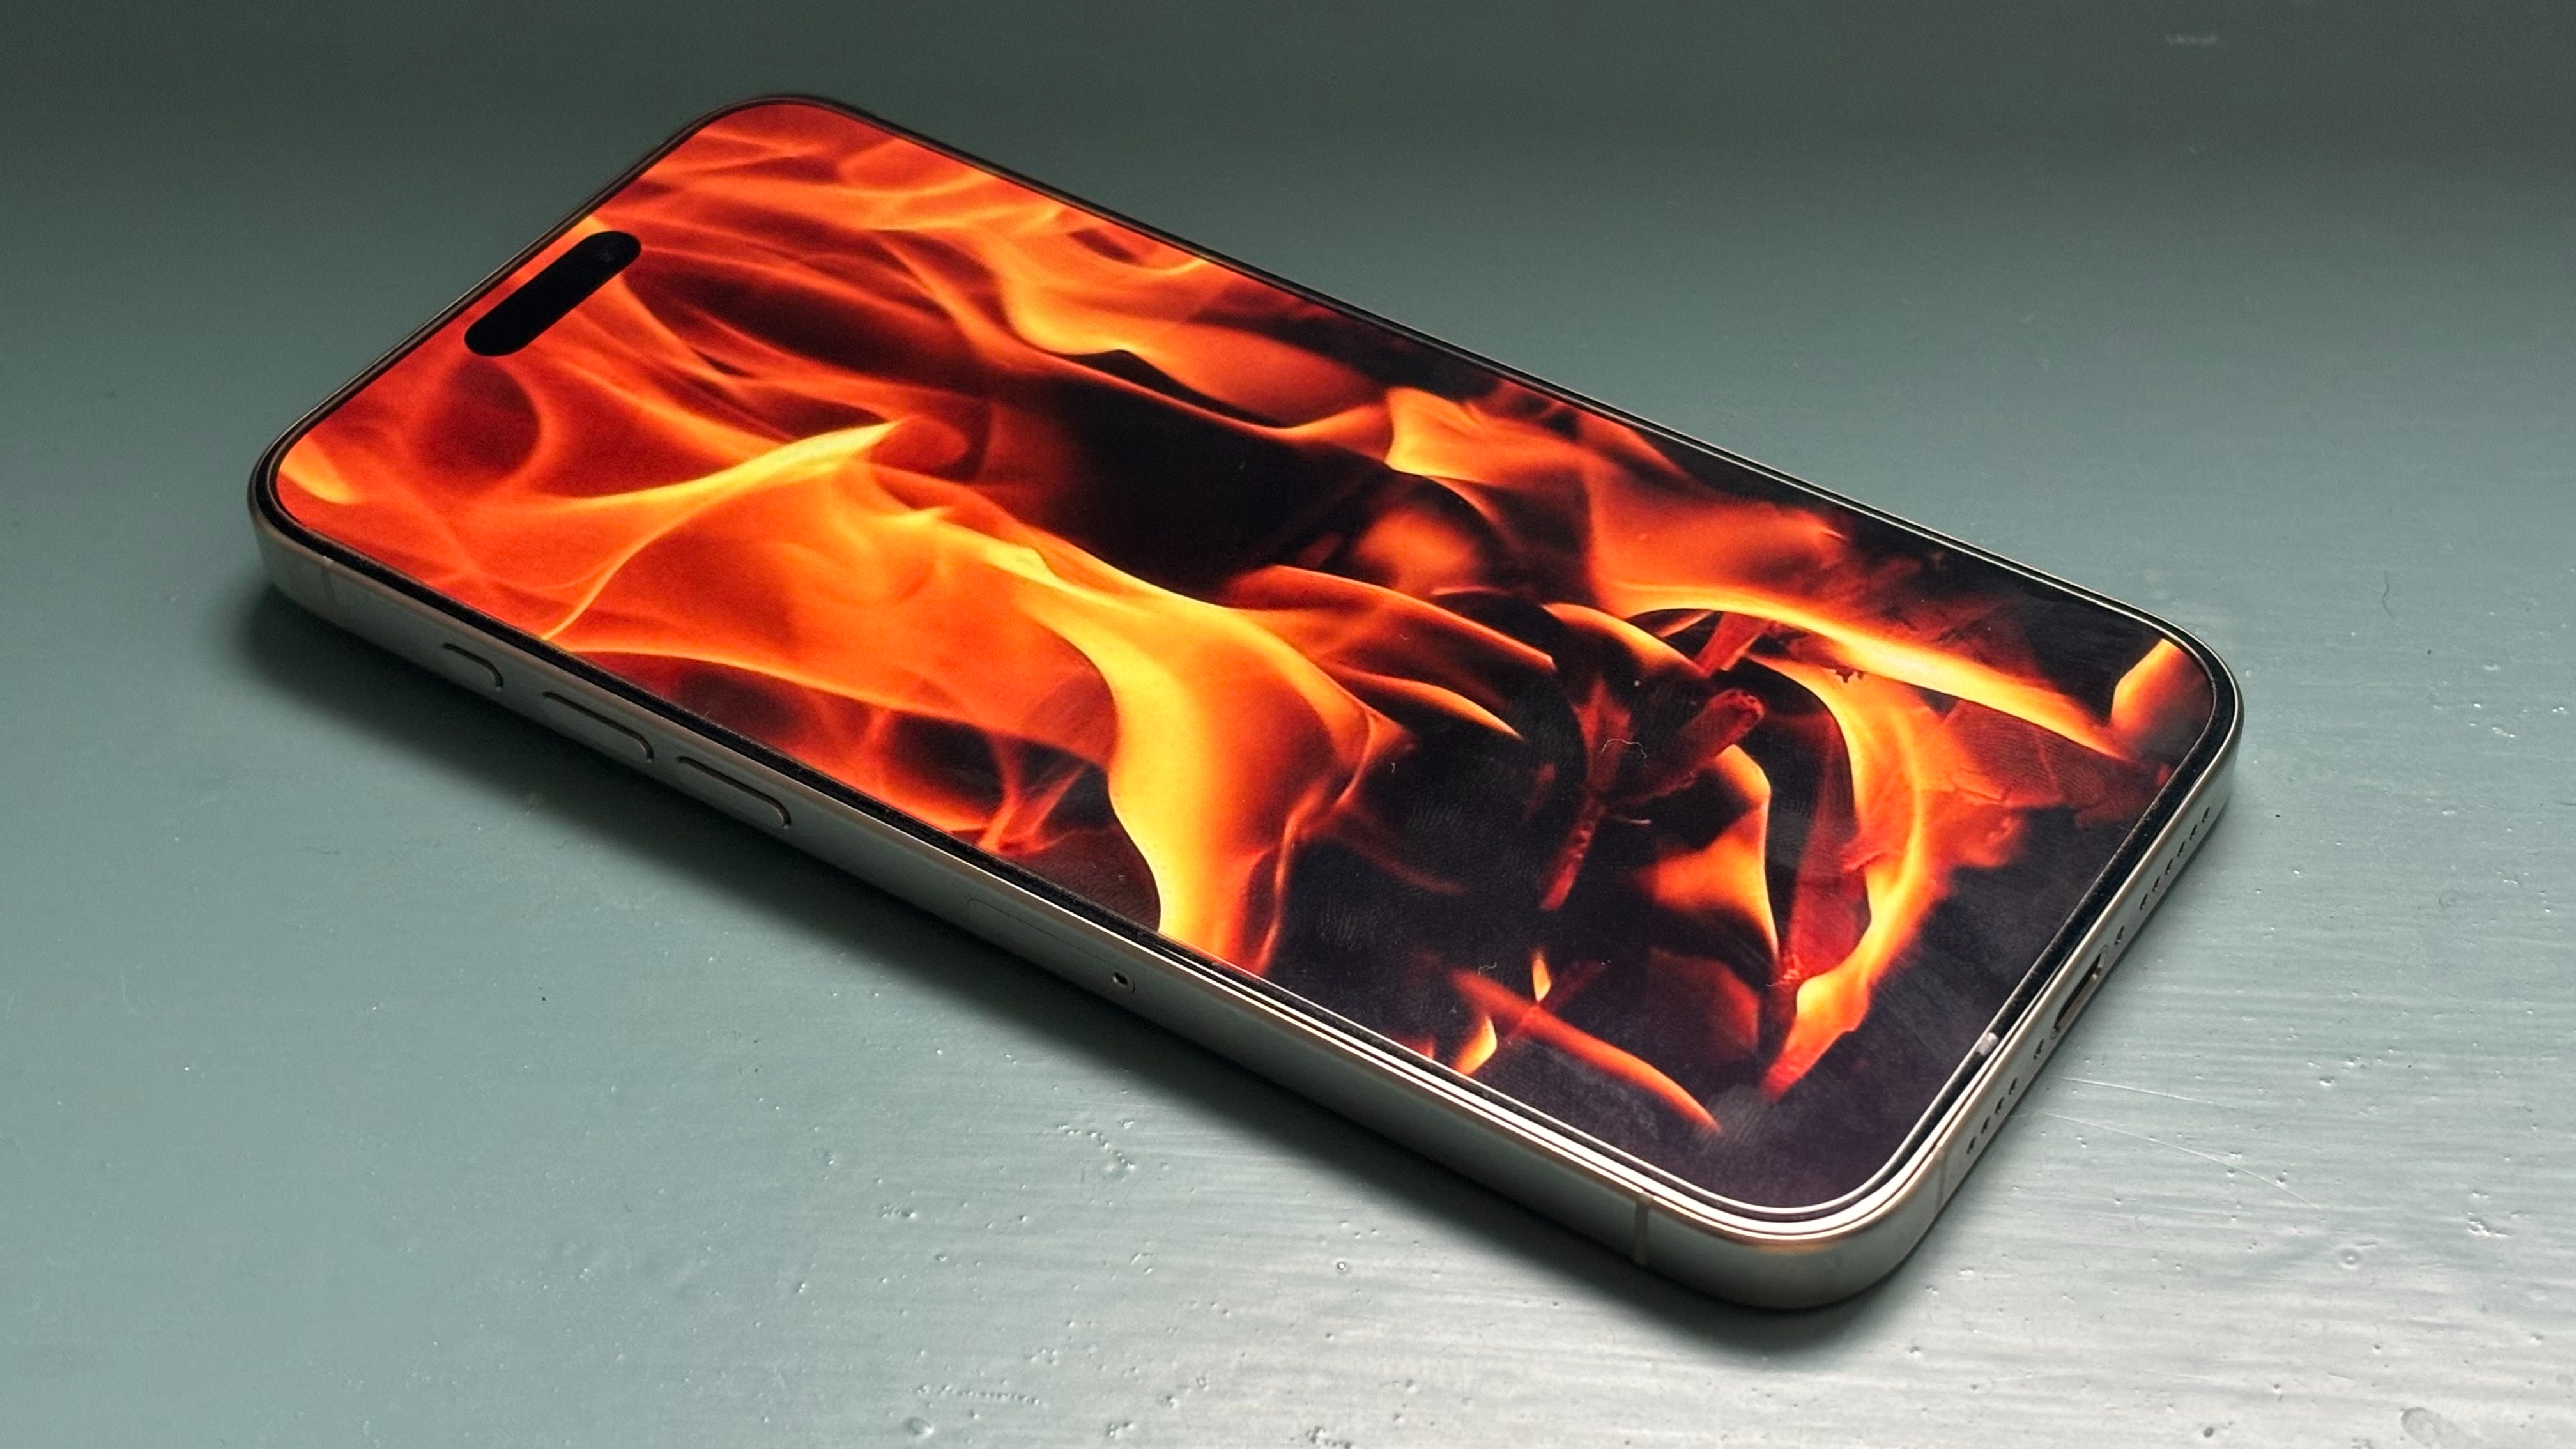 Thought your overheating issues were over? Turns out your iPhone